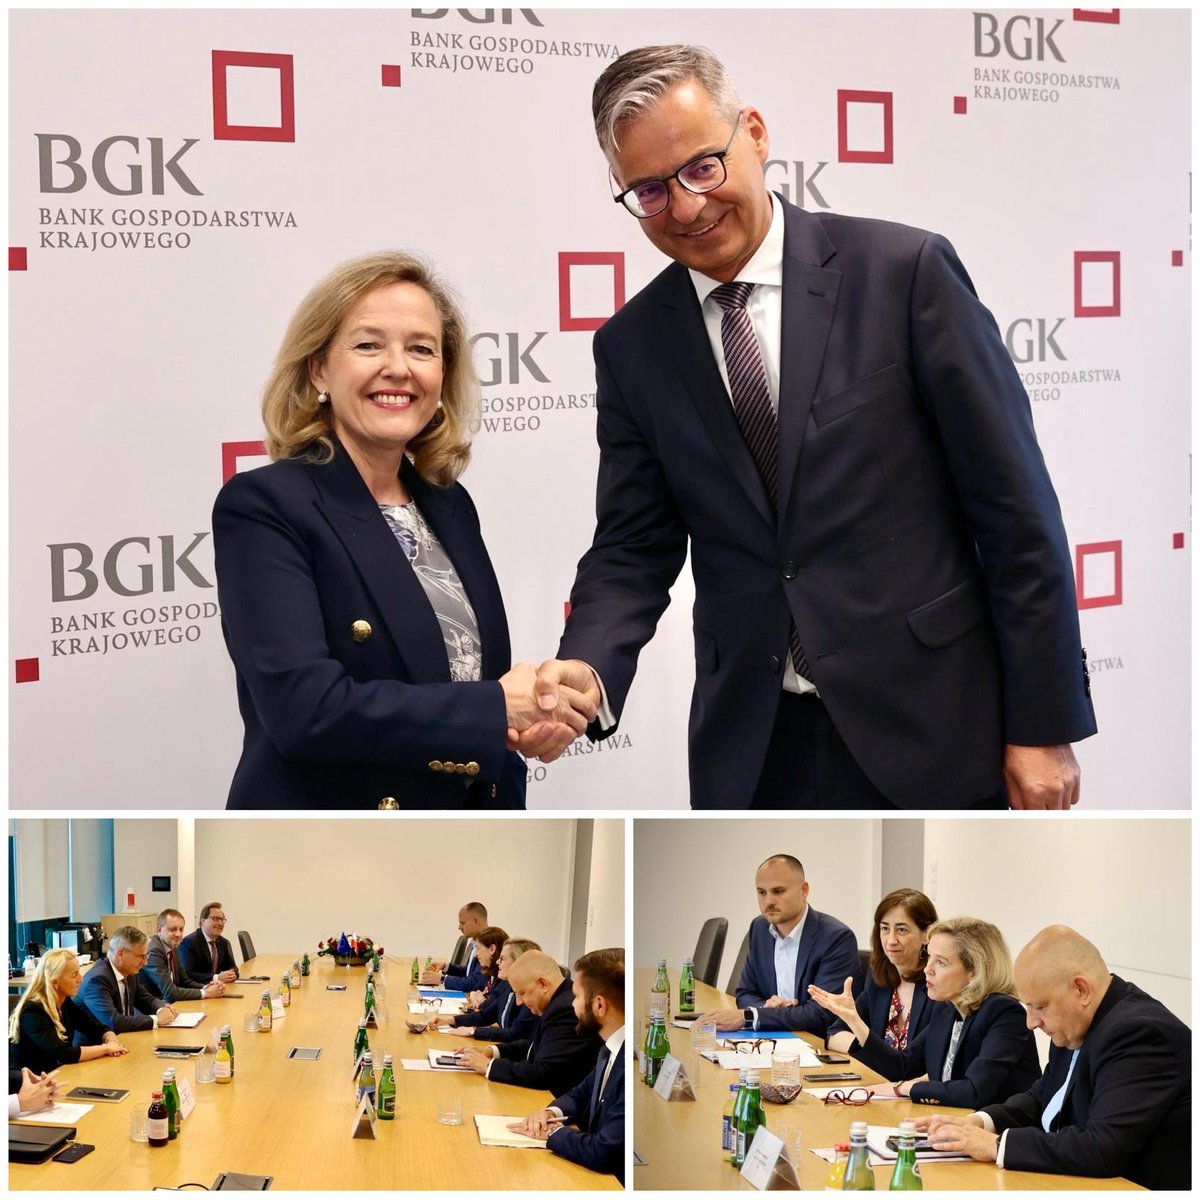 🇪🇺🇵🇱 Excellent exchange with President Czekaj @BGK_pl on our shared strategic priorities to boost Poland’s competitiveness, security and economic growth through investment in transport & energy infrastructures, innovation, support to SMEs, modern cities, hospitals & housing.